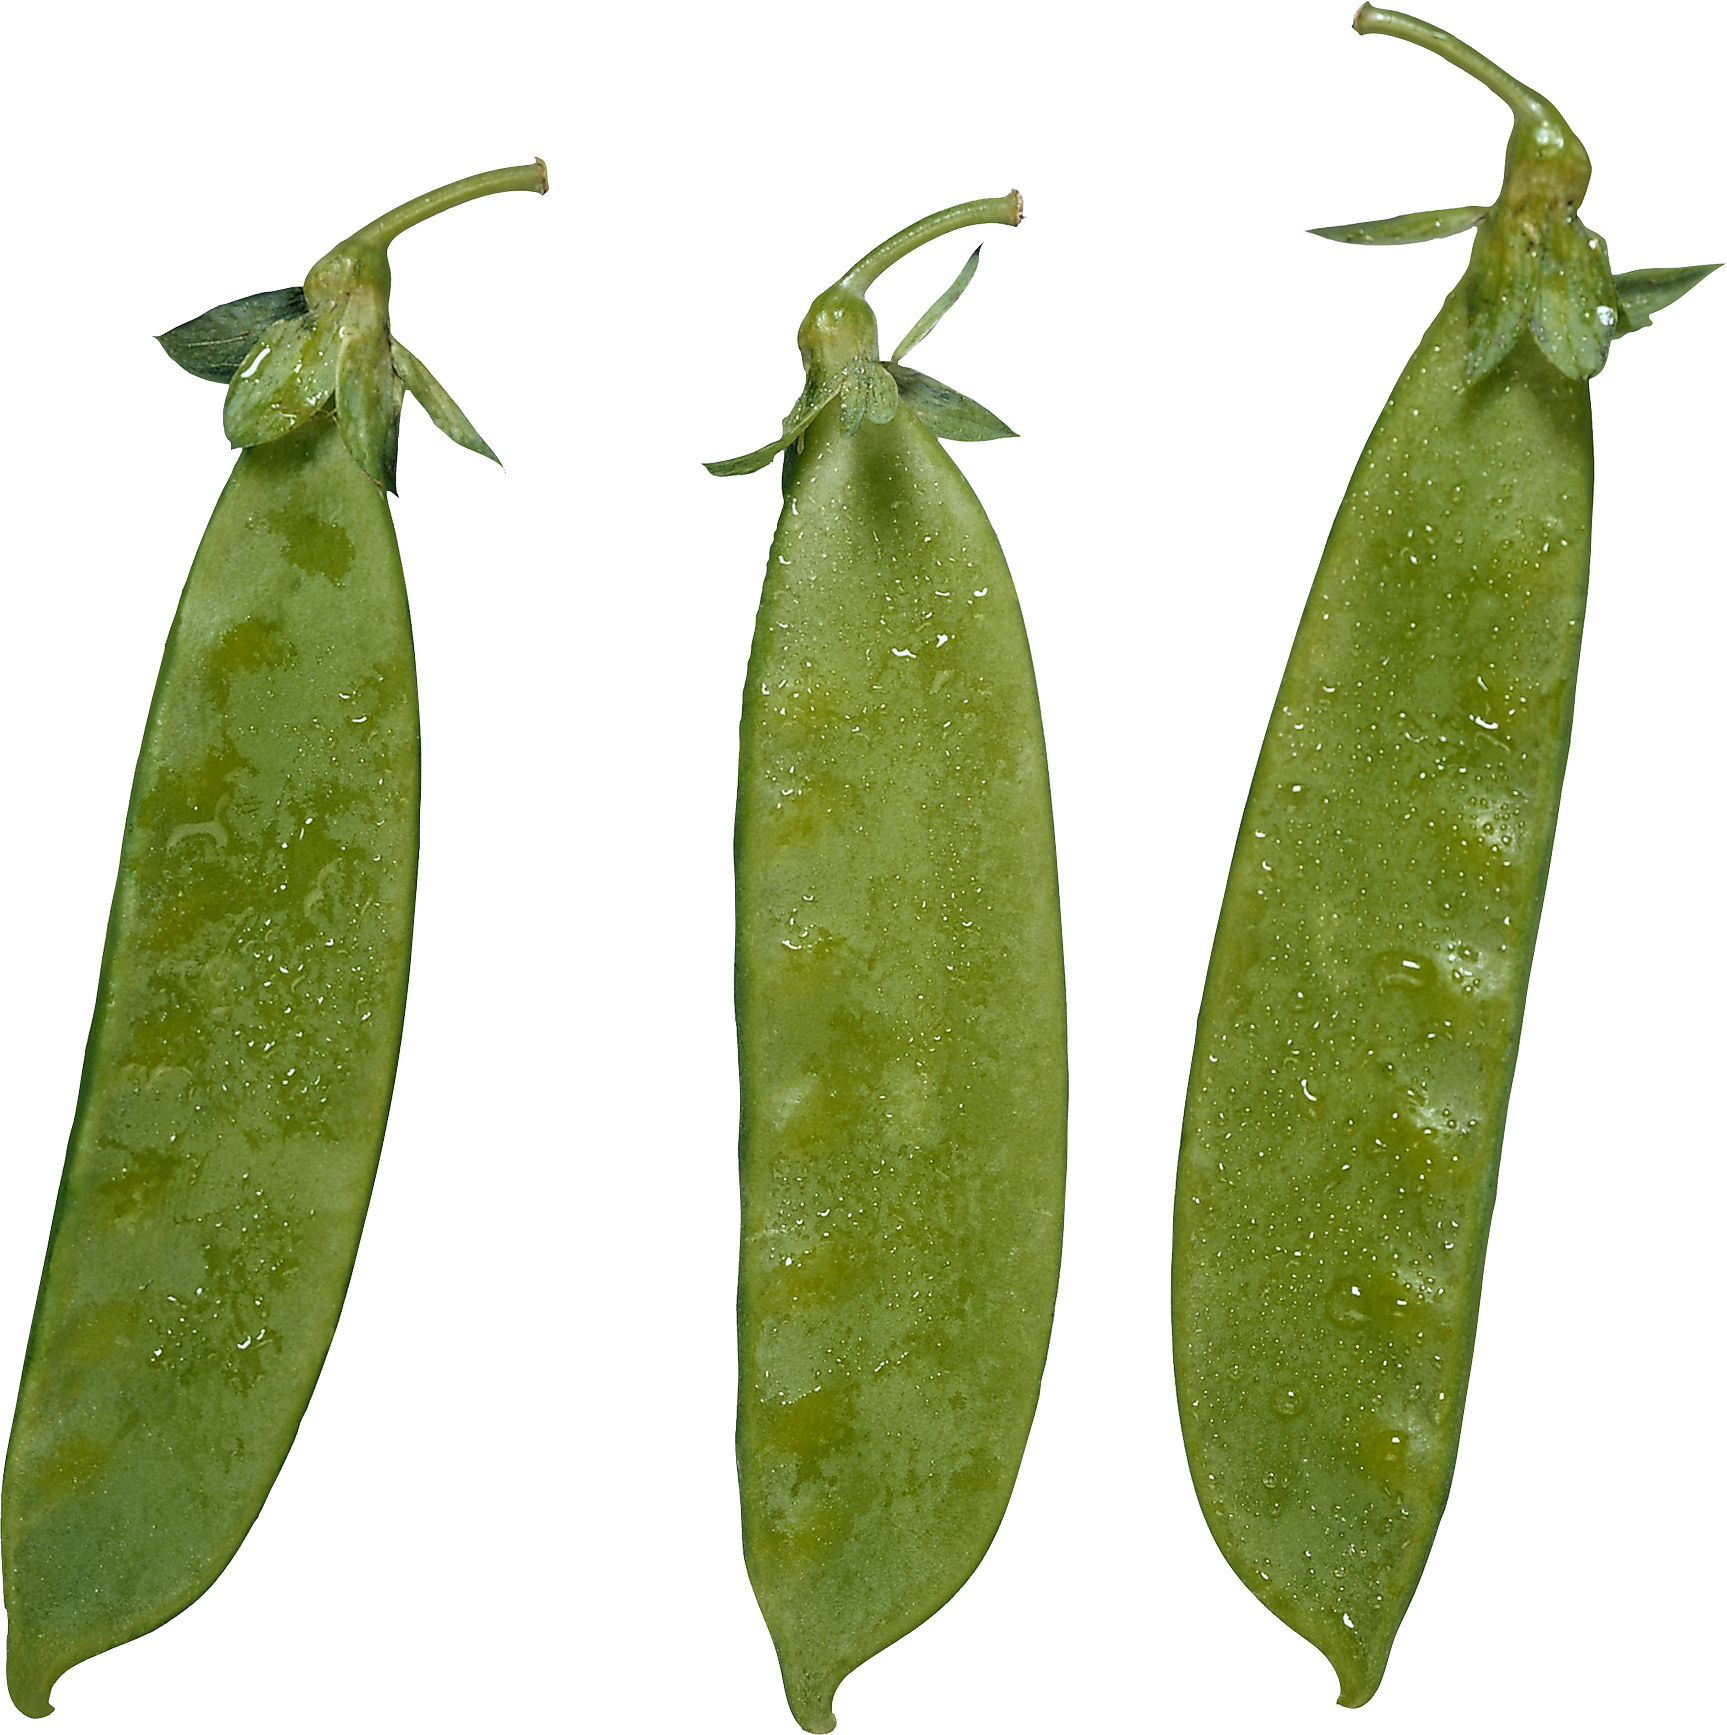 A Group Of Peas On A Black Background